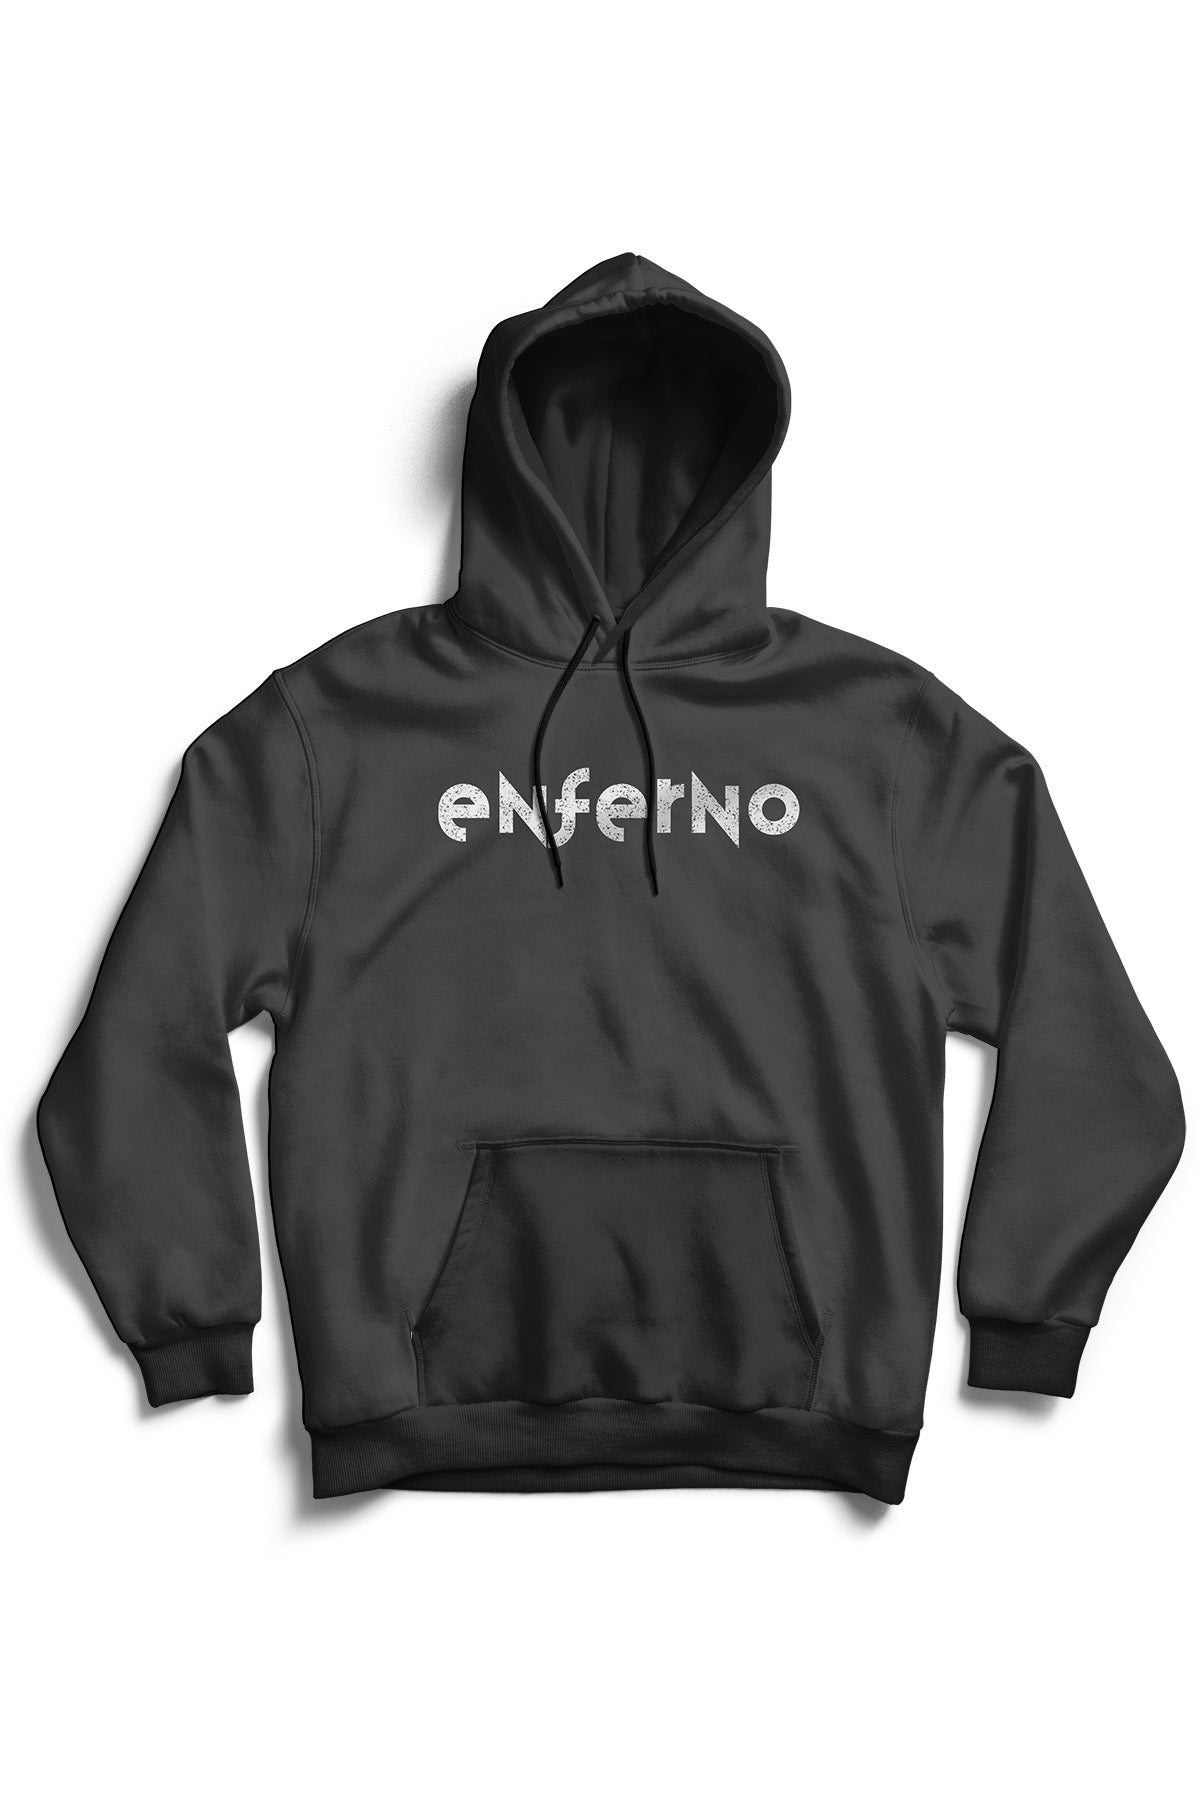 Enferno X-Ray Unicorn Hoodie front in Black.